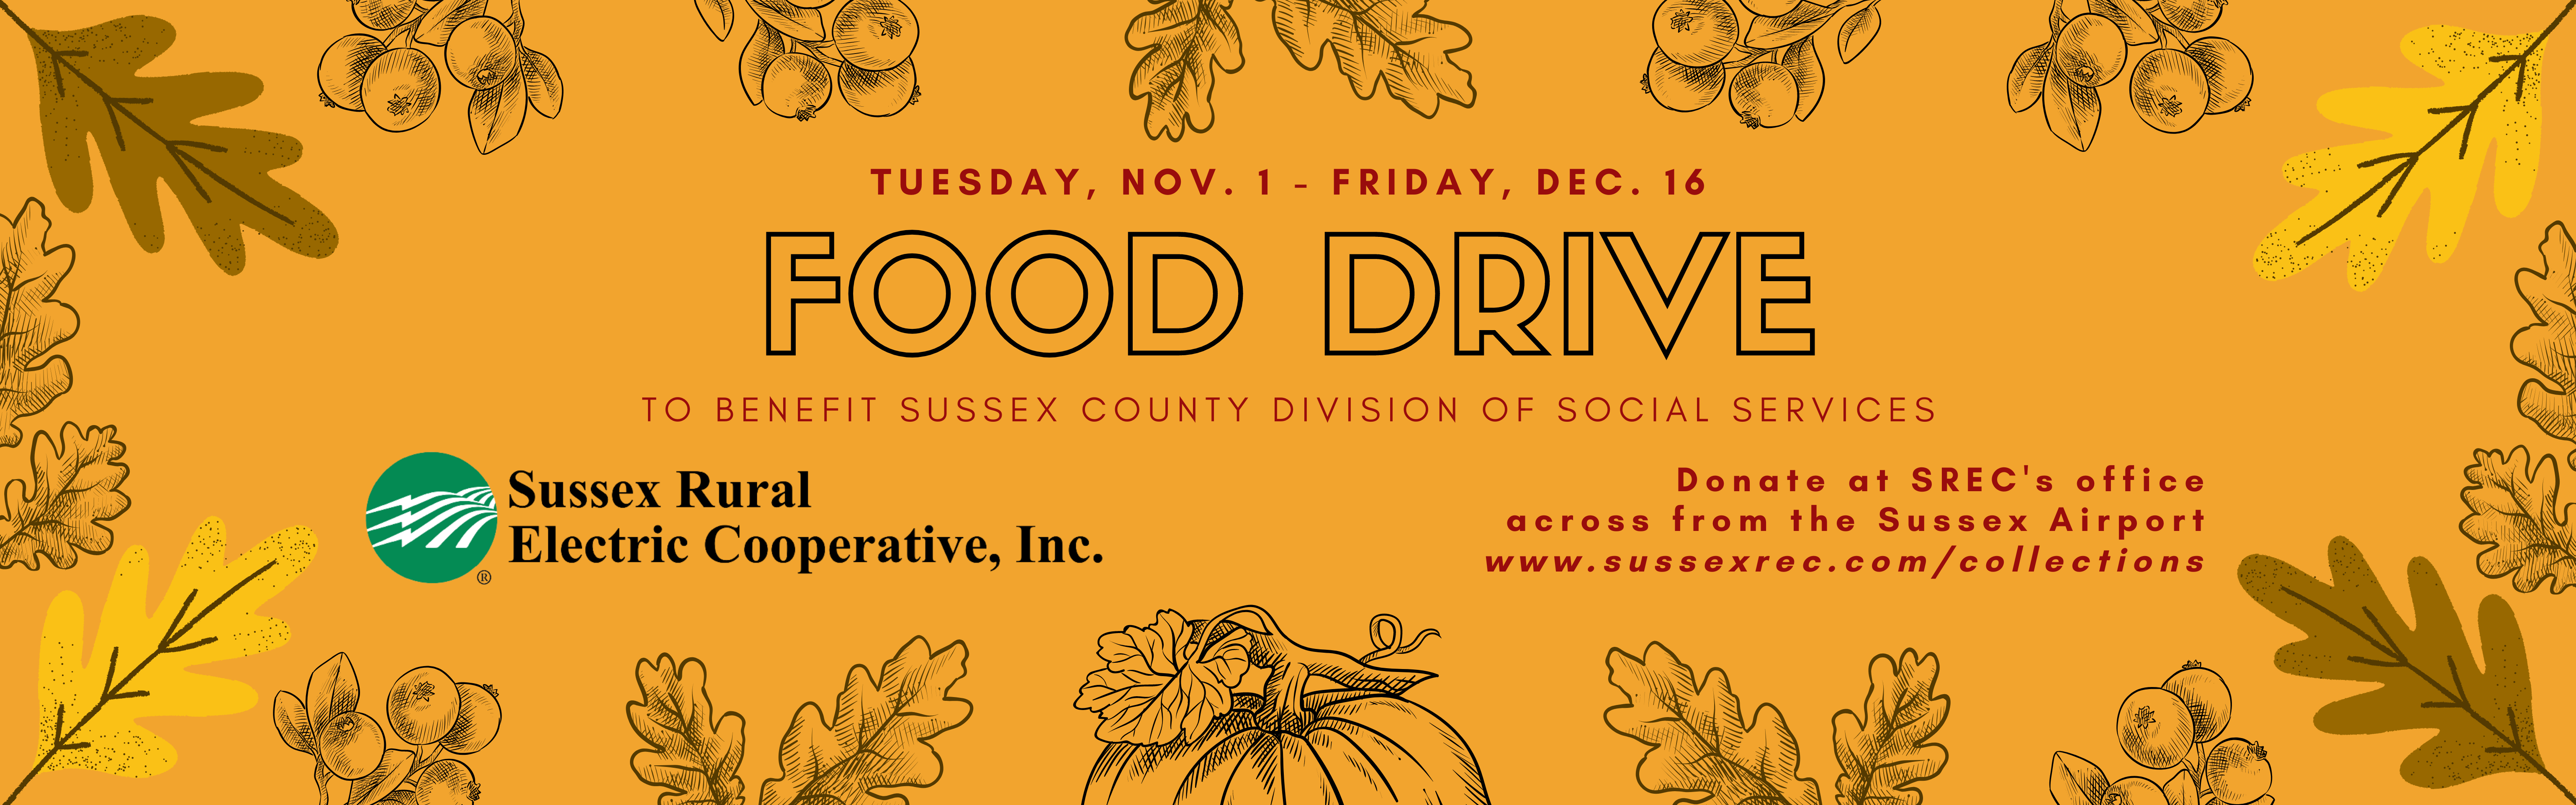 Tuesday, Nov. 1 - Friday, Dec. 16 FOOD DRIVE to benefit the Sussex County Division of Social Services. Donate at SREC's office across from the Sussex Airport. www.sussexrec.com/collections